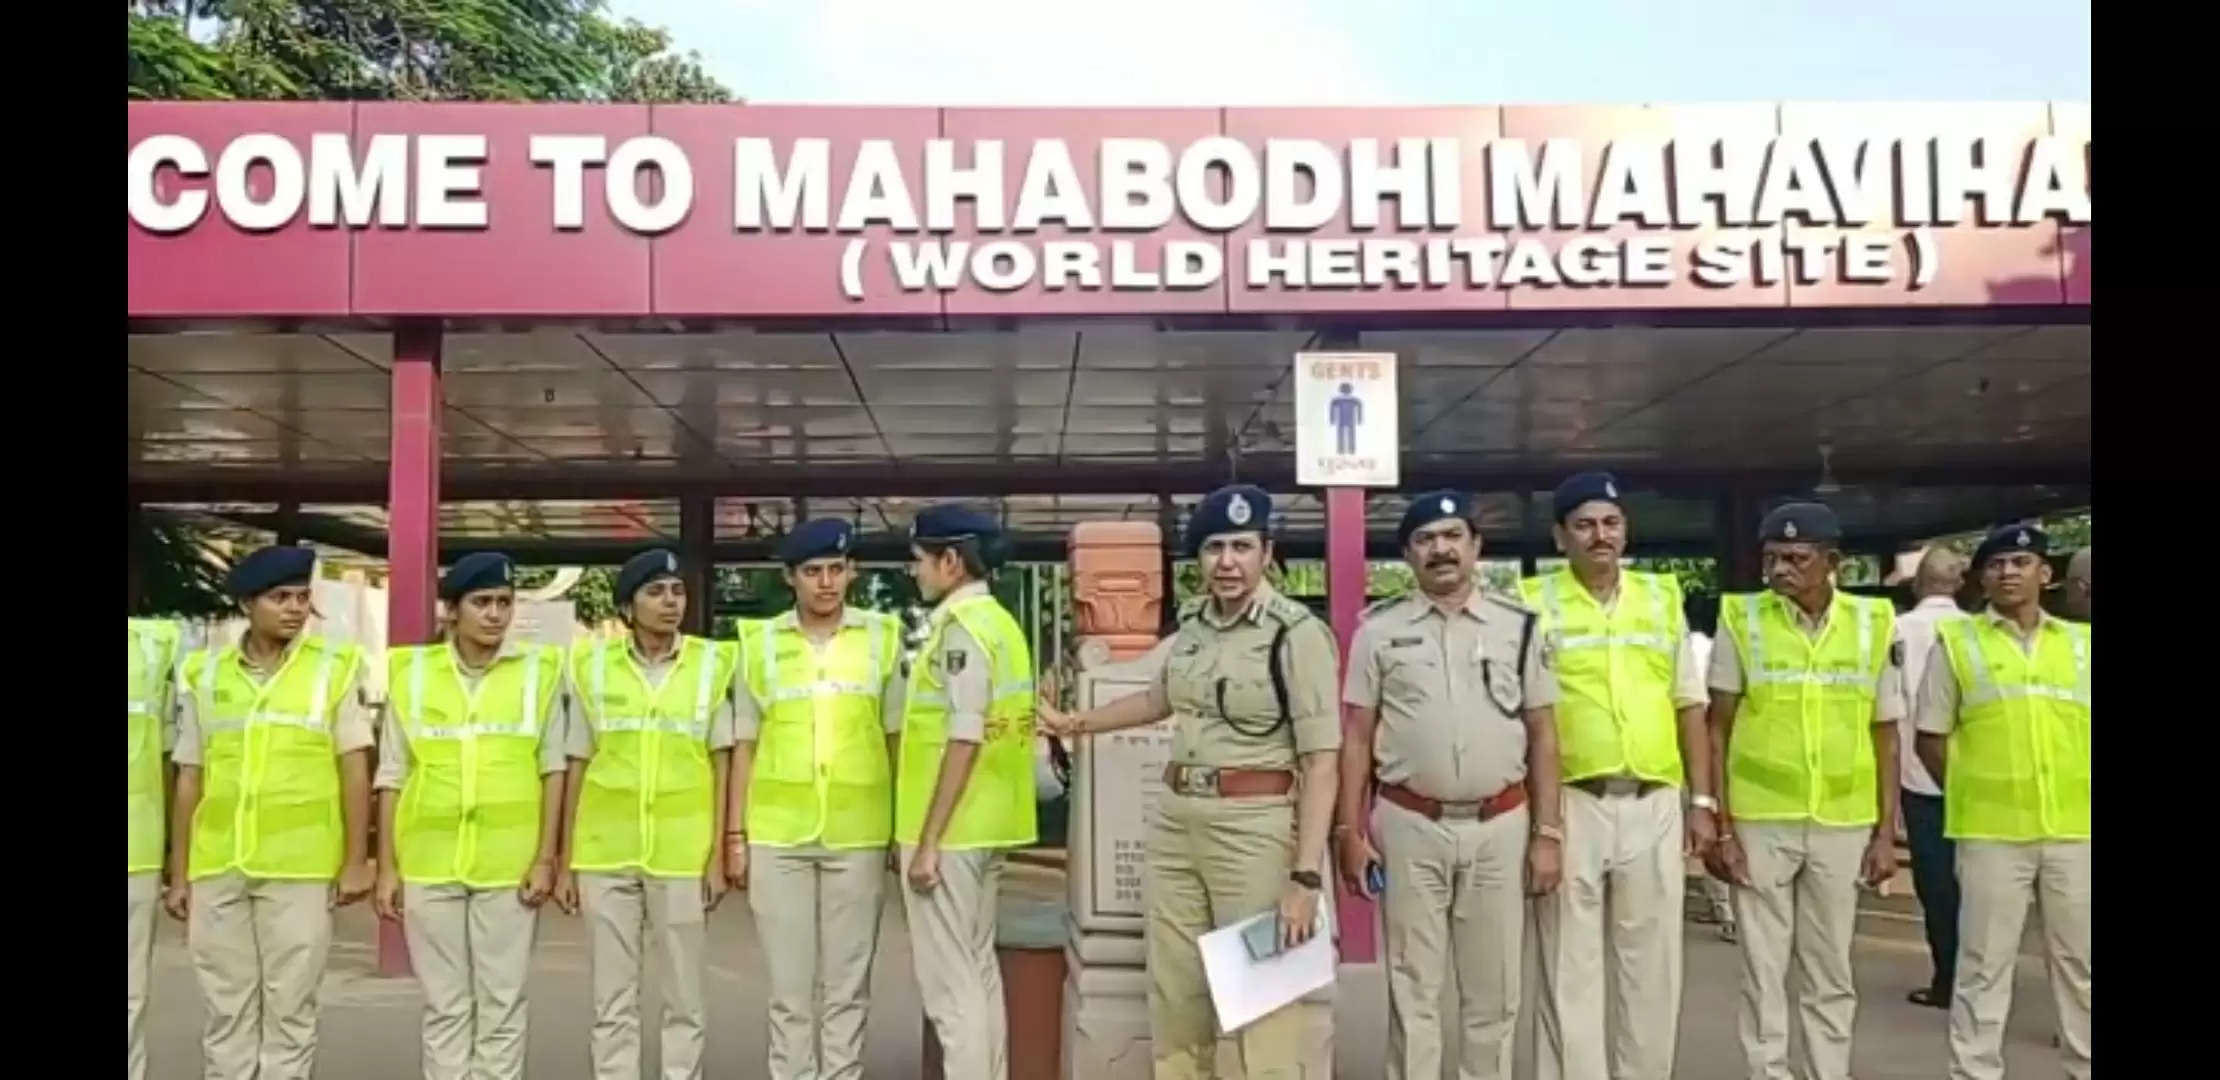 Tourist police launched at Mahabodhi temple in BodhGaya